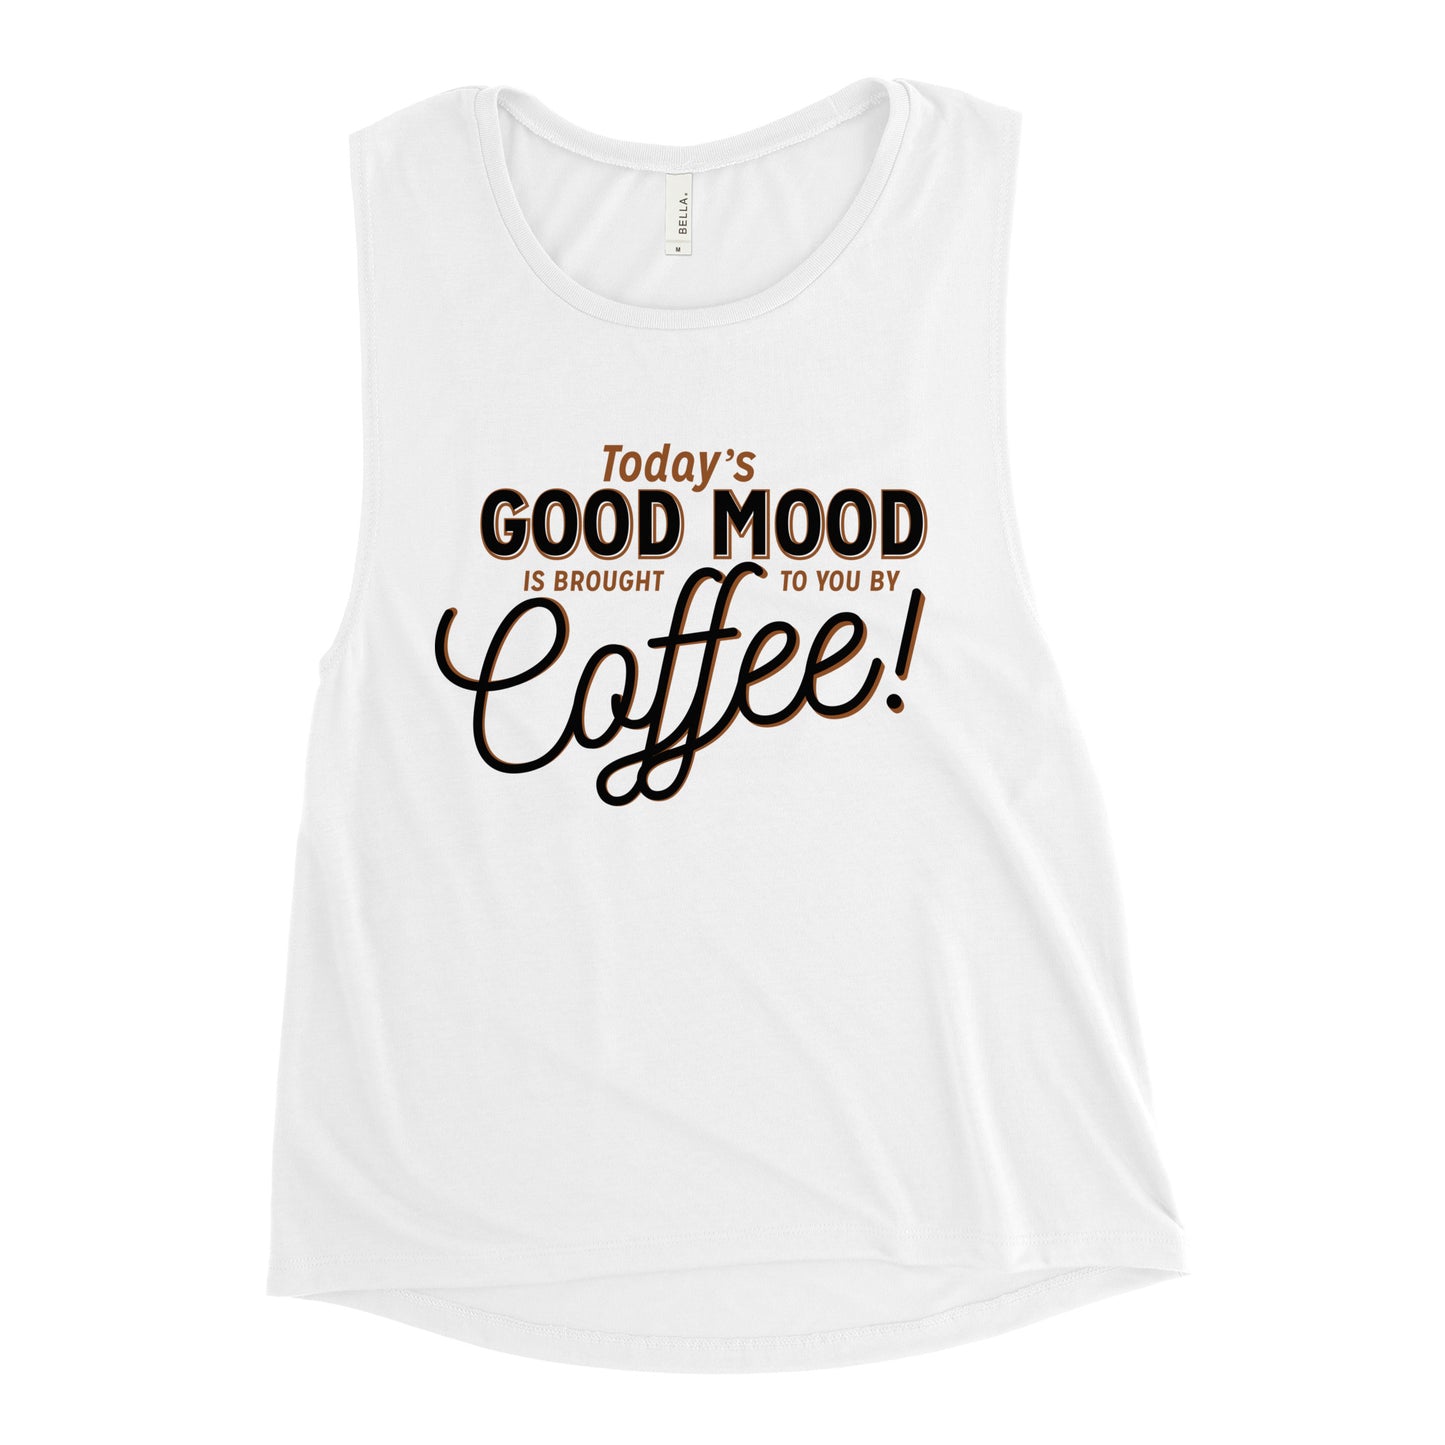 Today's Good Mood Women's Muscle Tank